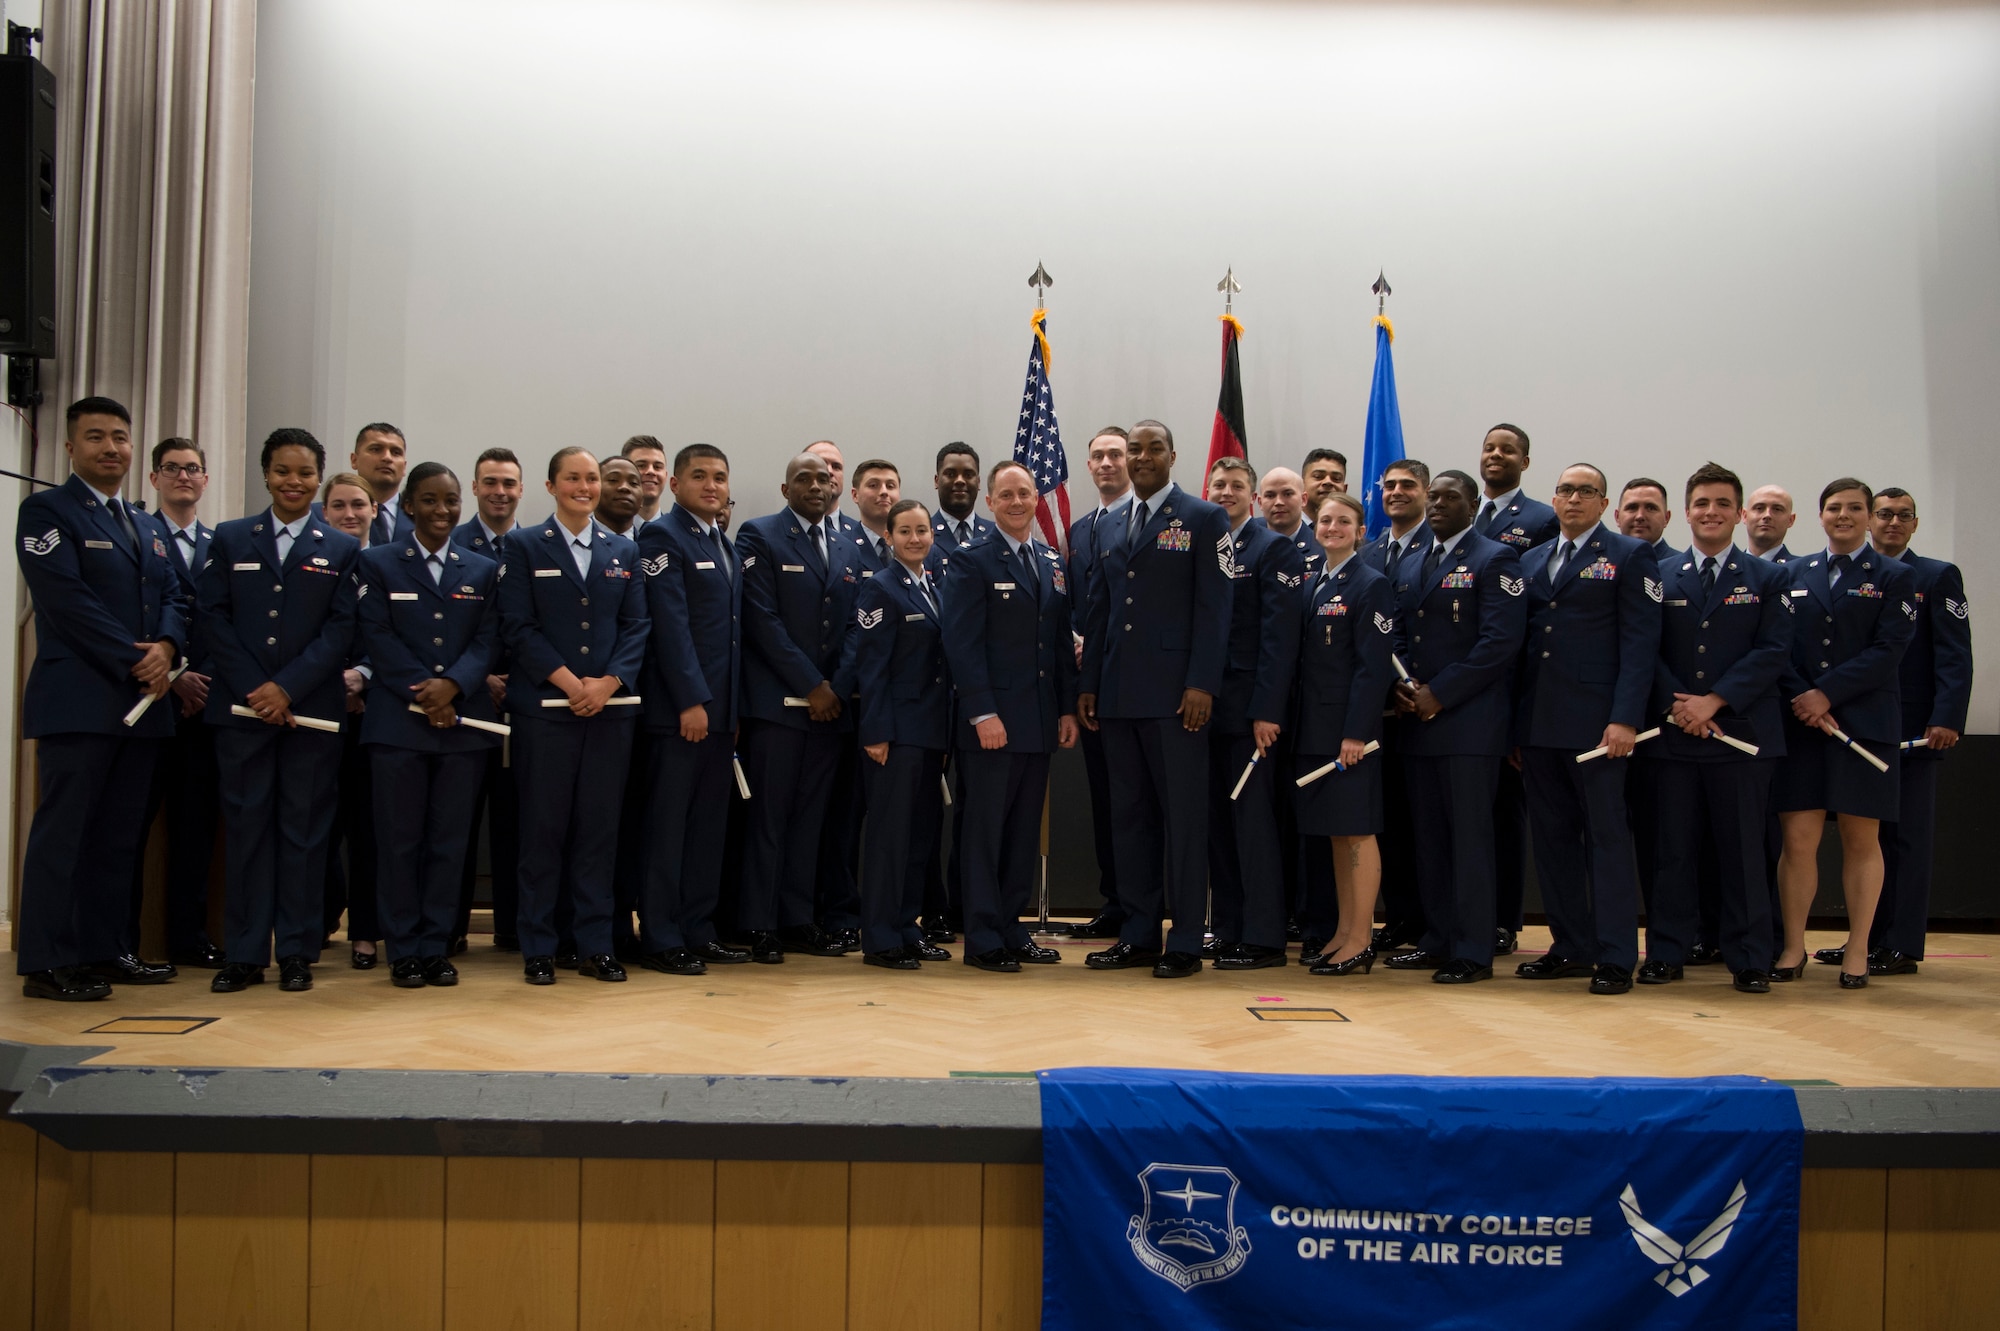 The Airmen earned their associates degrees in various career-related fields as part of their completion from the largest community college in the United States.